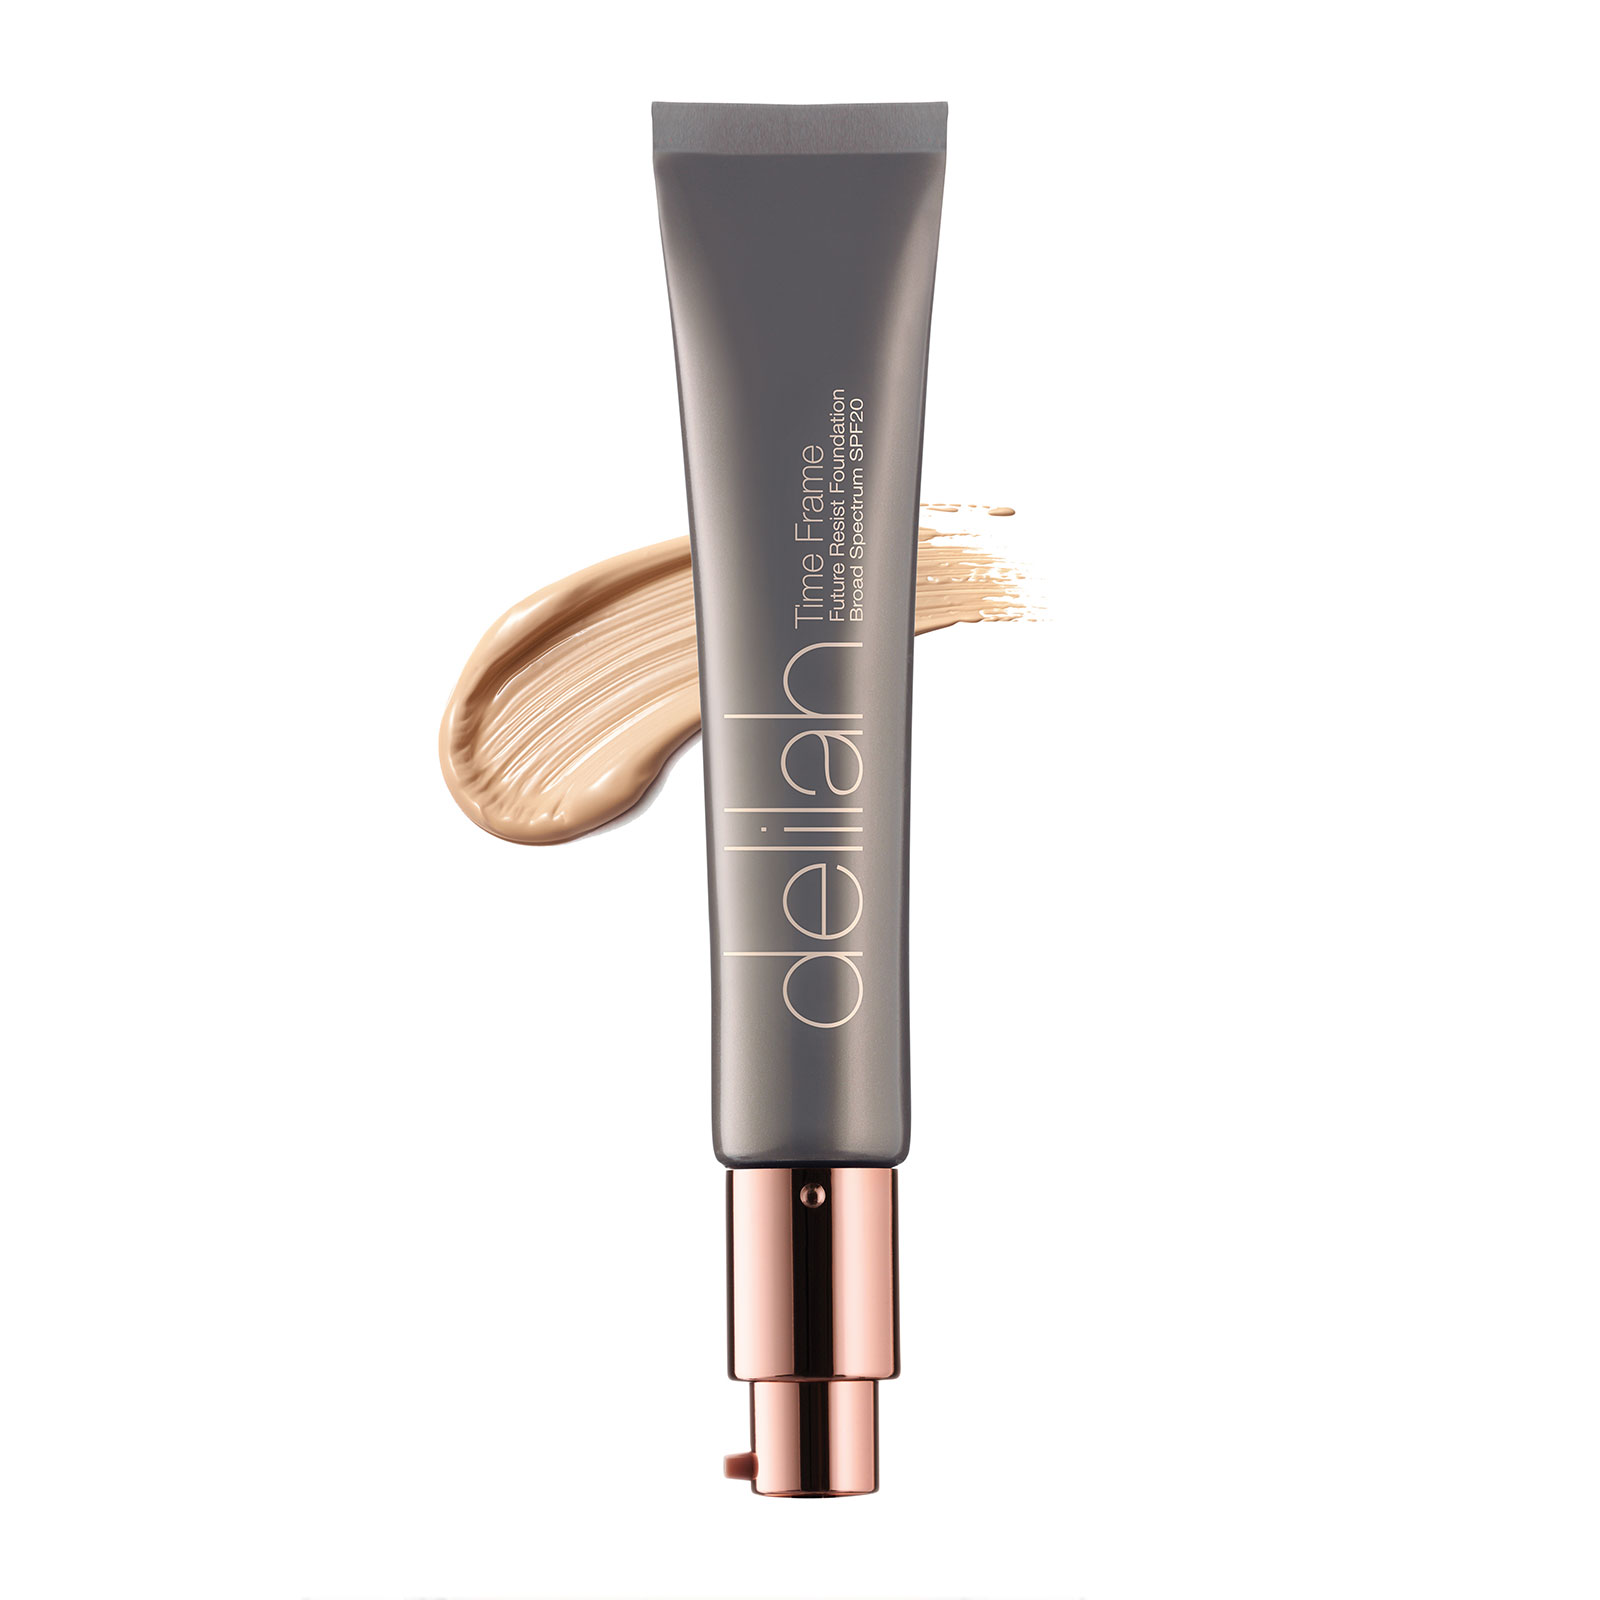 Delilah Time Frame Future Resist Foundation Spf20 38Ml Lace